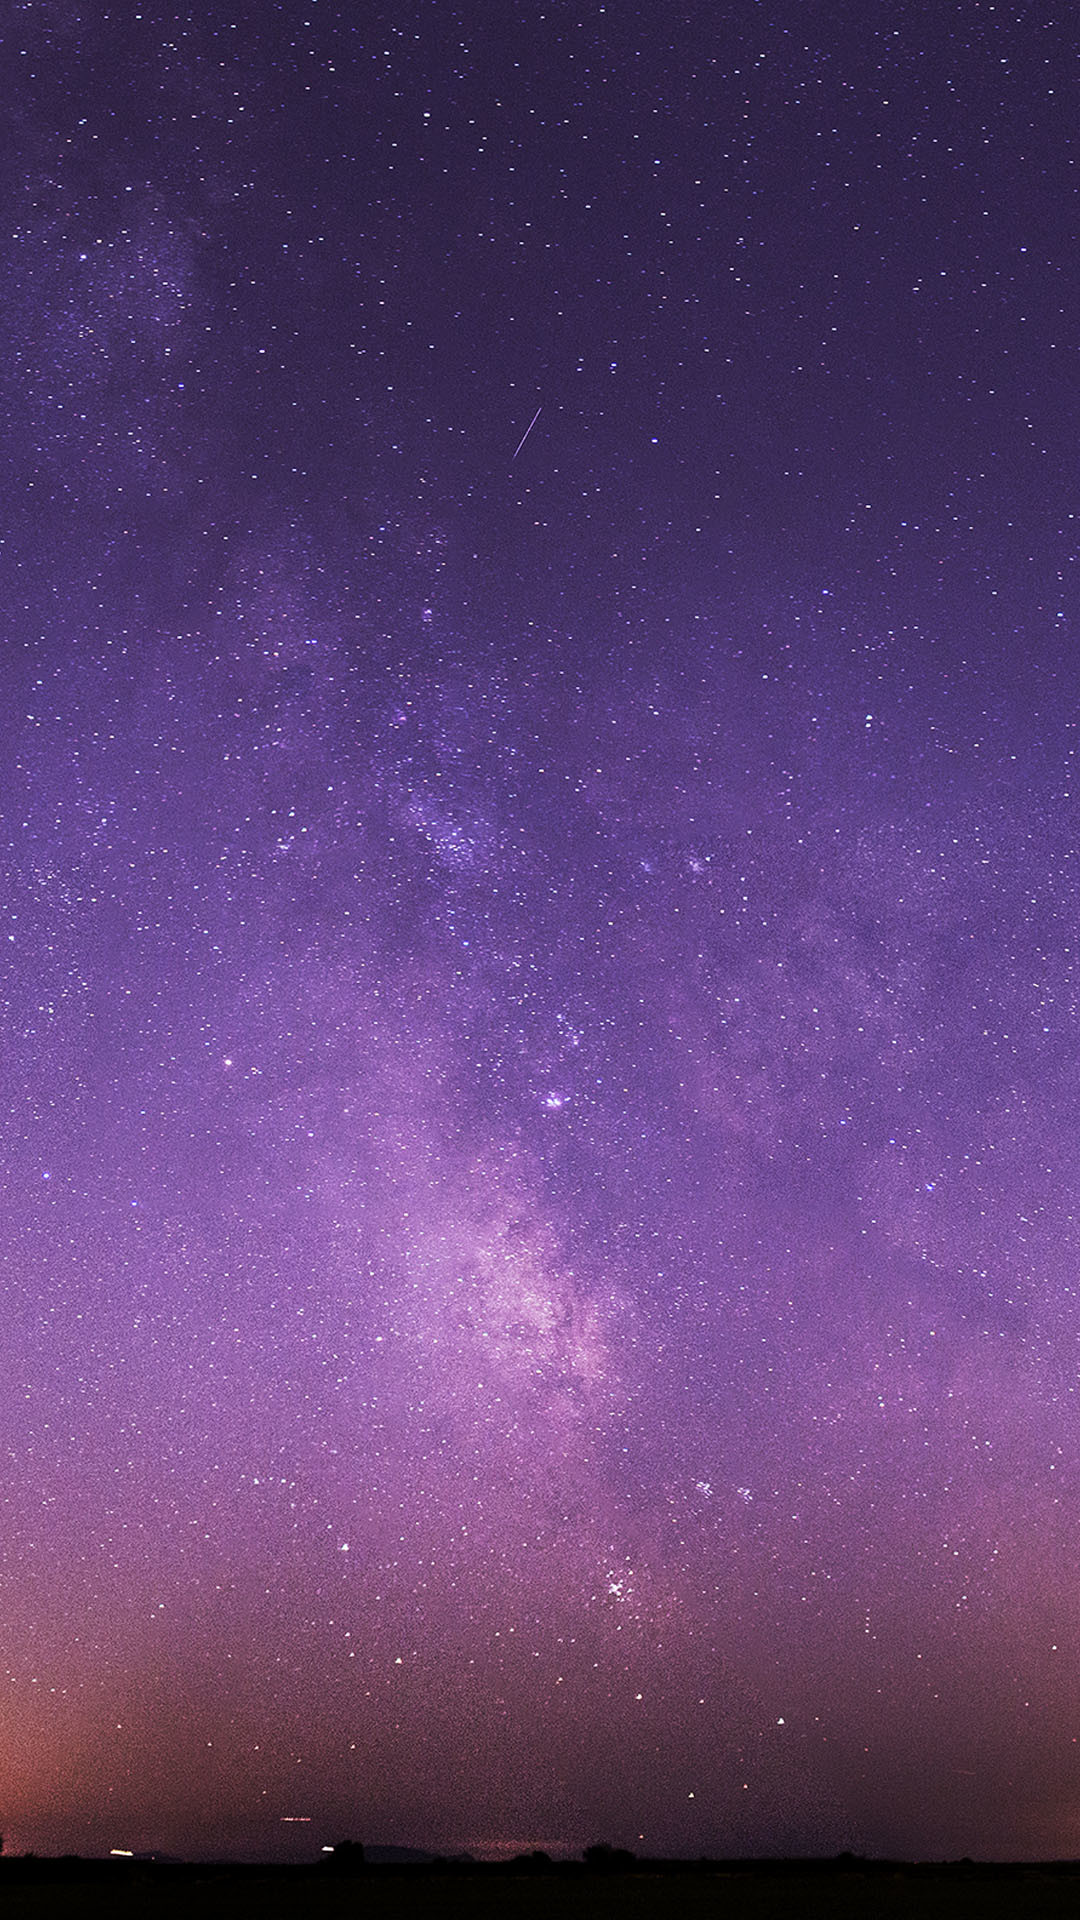 1080x1920 ... Wallpaper free download Purple Night Sky Pictures #7036108 ...